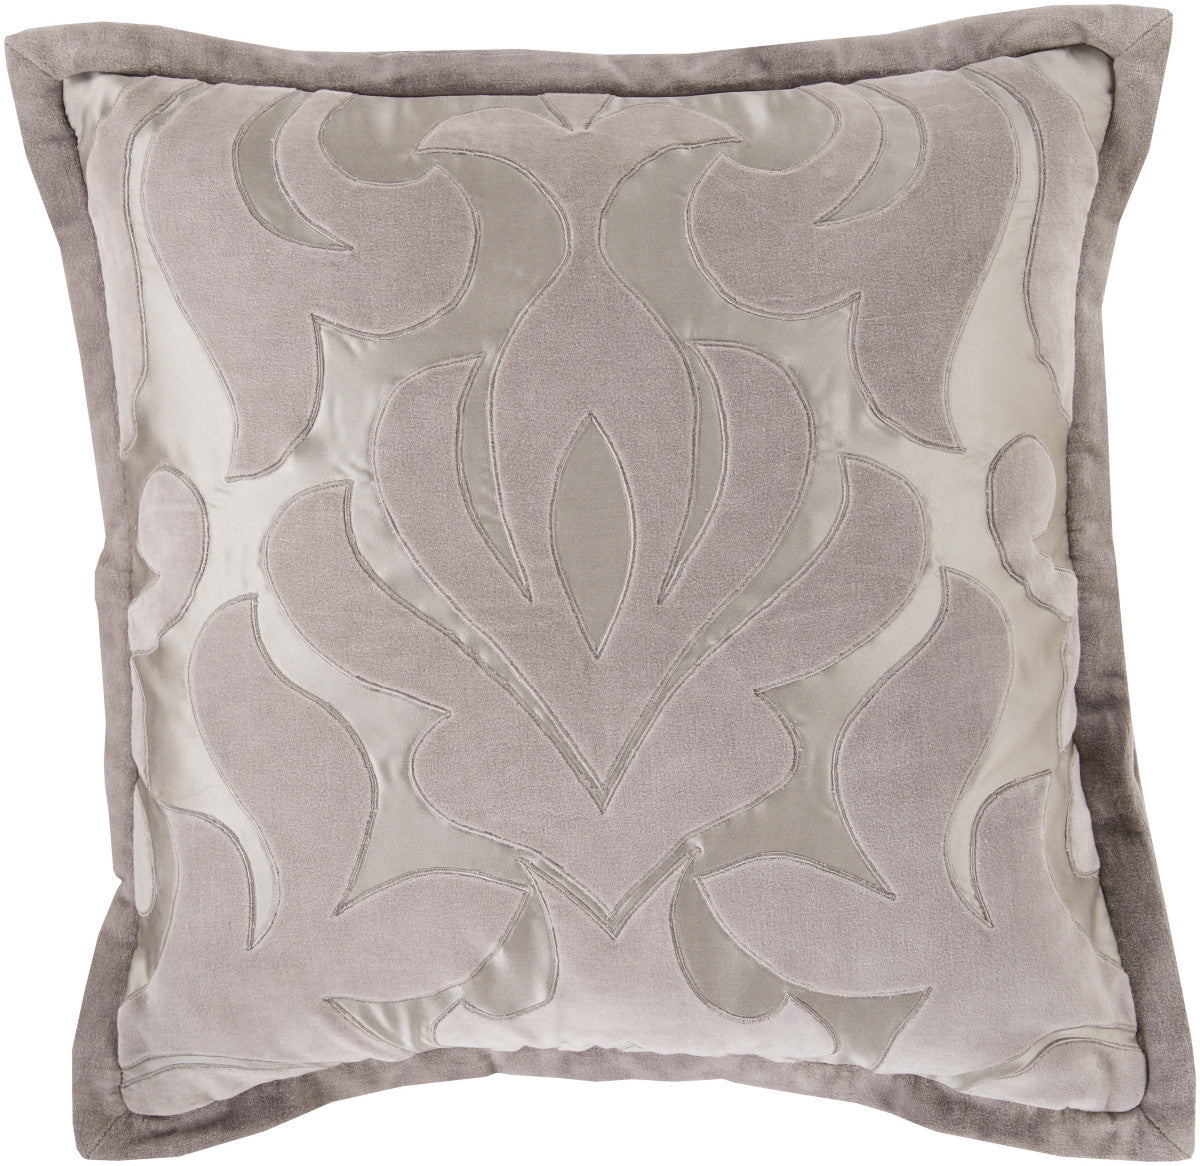 Surya Sweet Dreams SWD-001 Pillow by Candice Olson